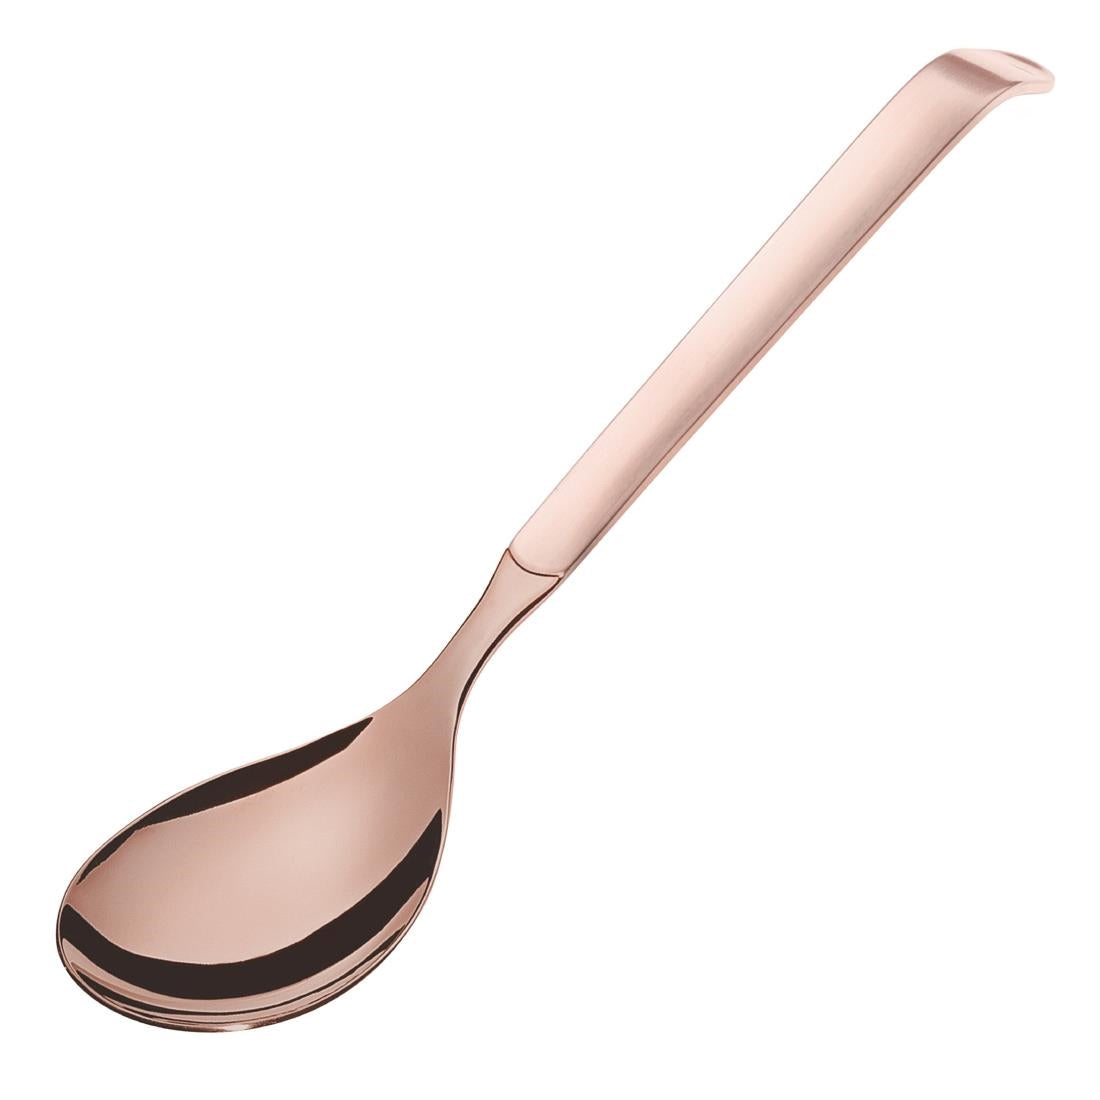 DX649 Amefa Buffet Large Salad Spoon Copper (Pack of 6)